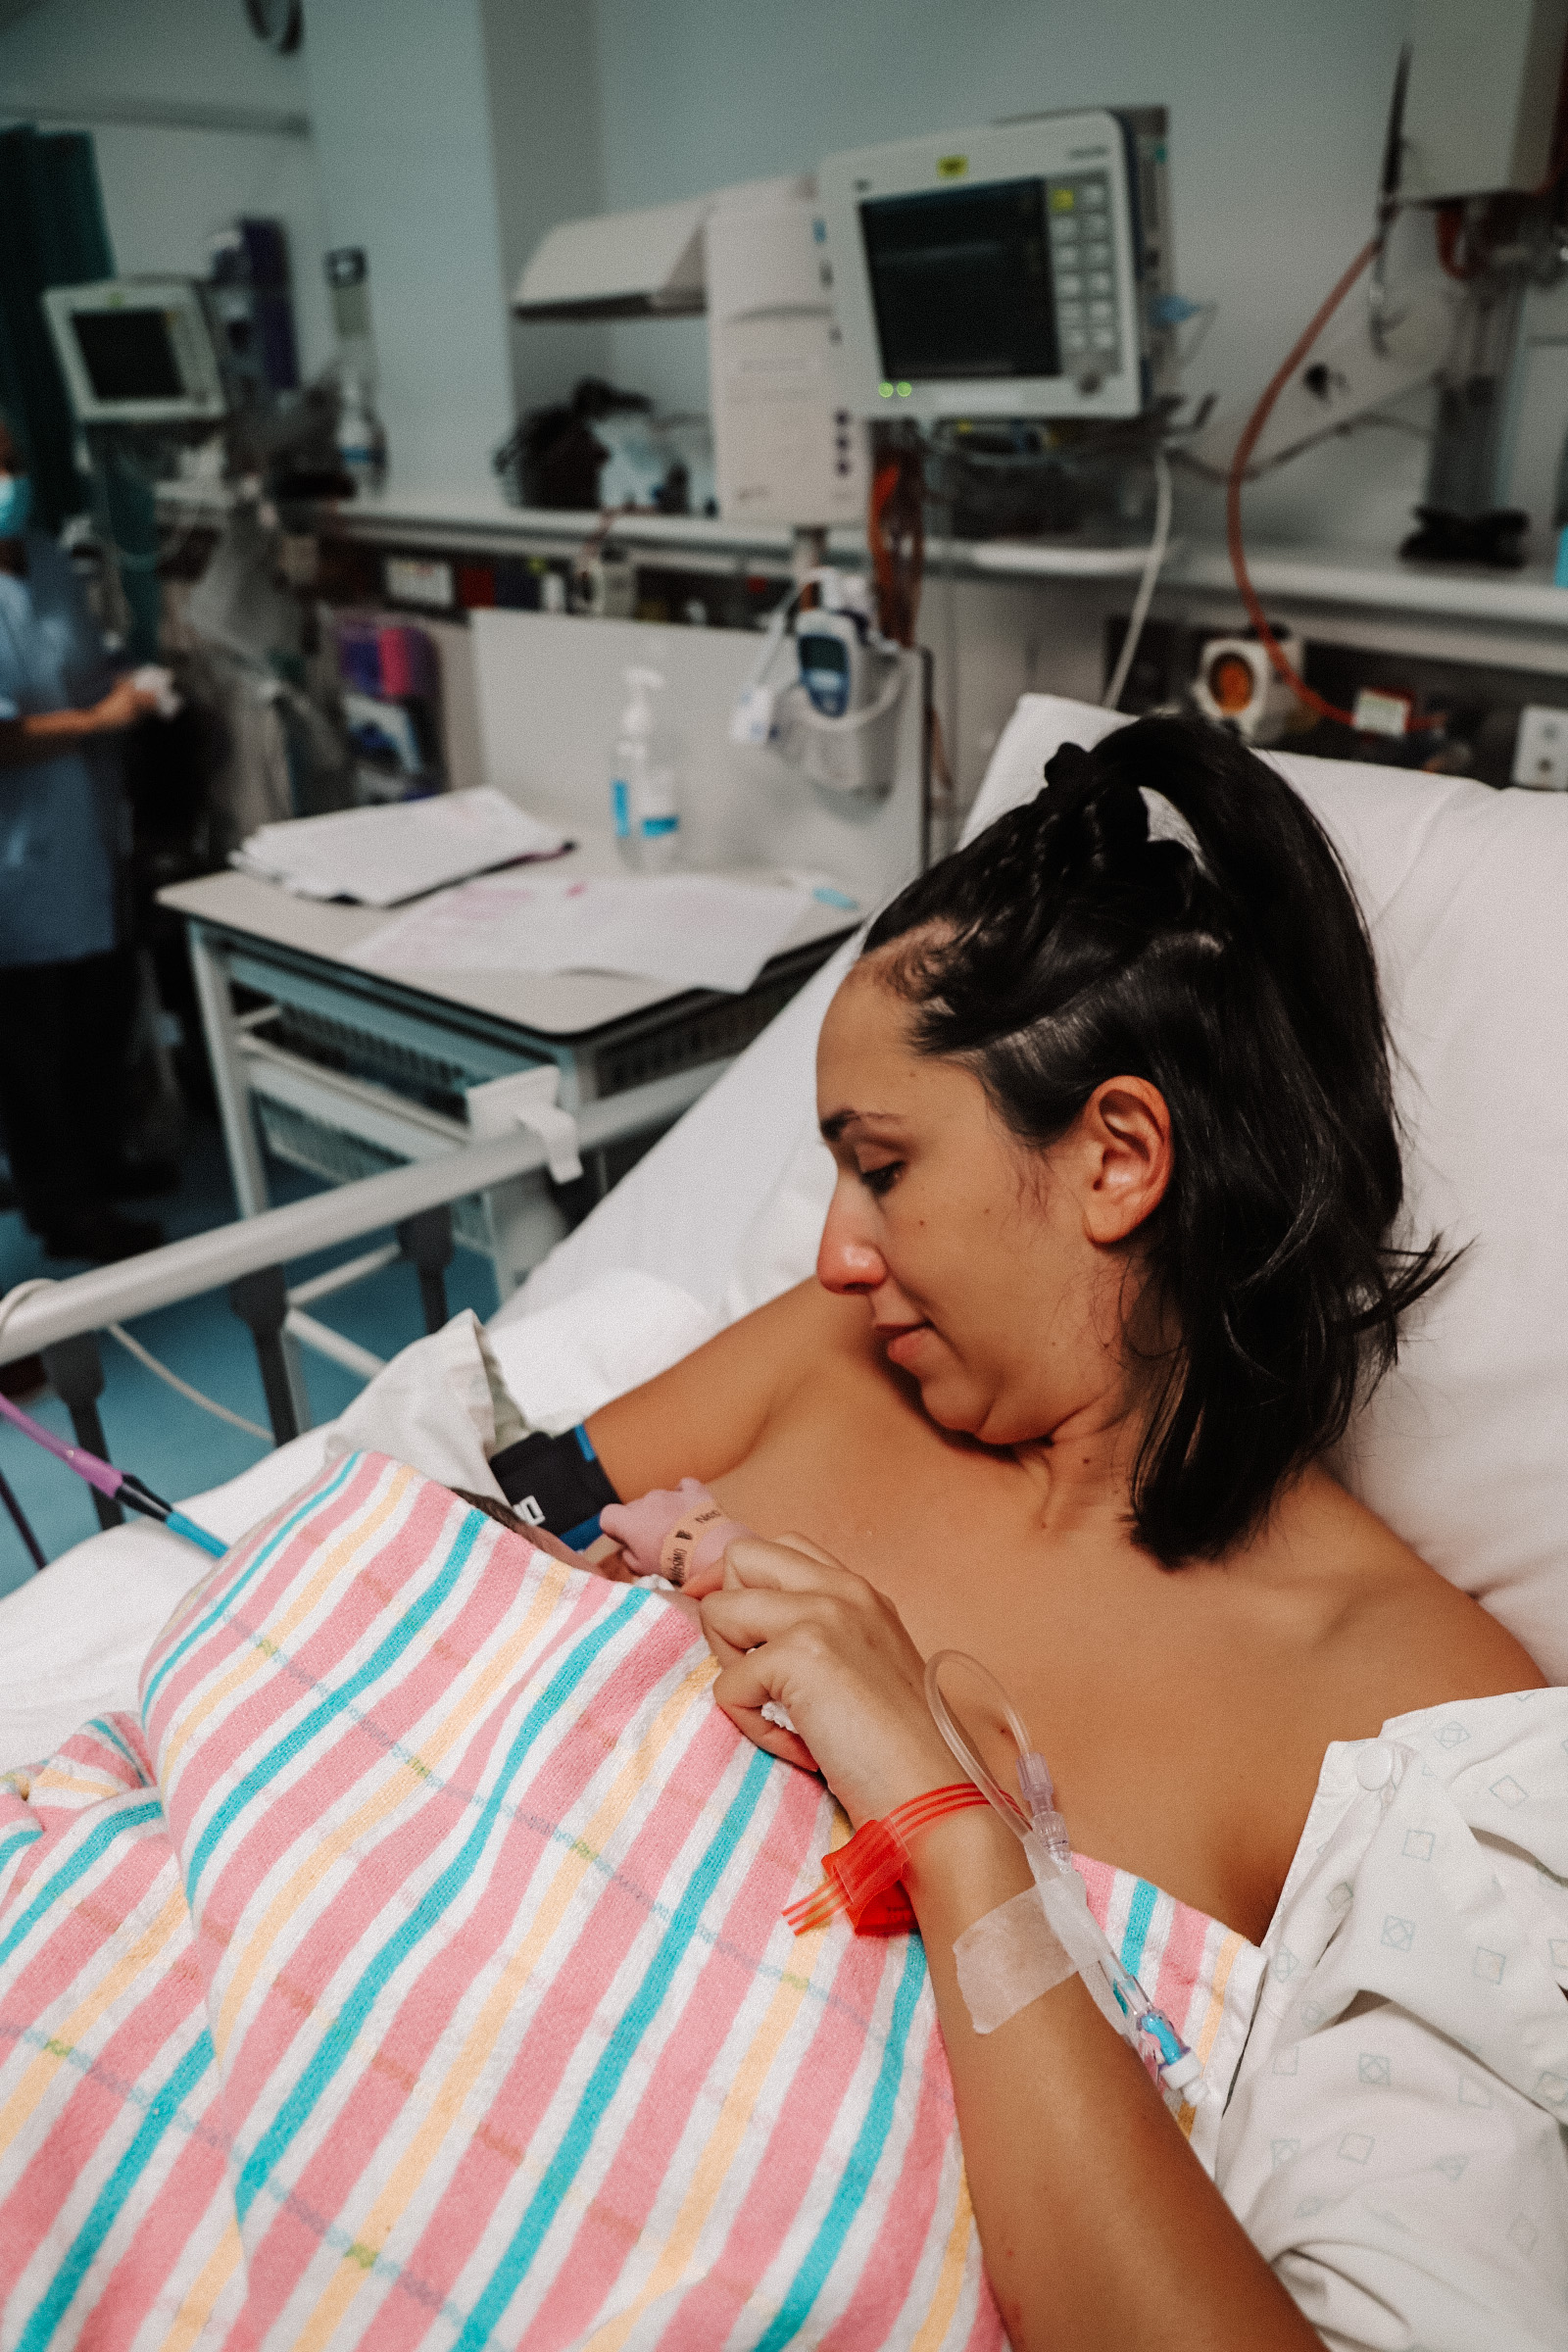 cesarean birth recovery tips and tricks.